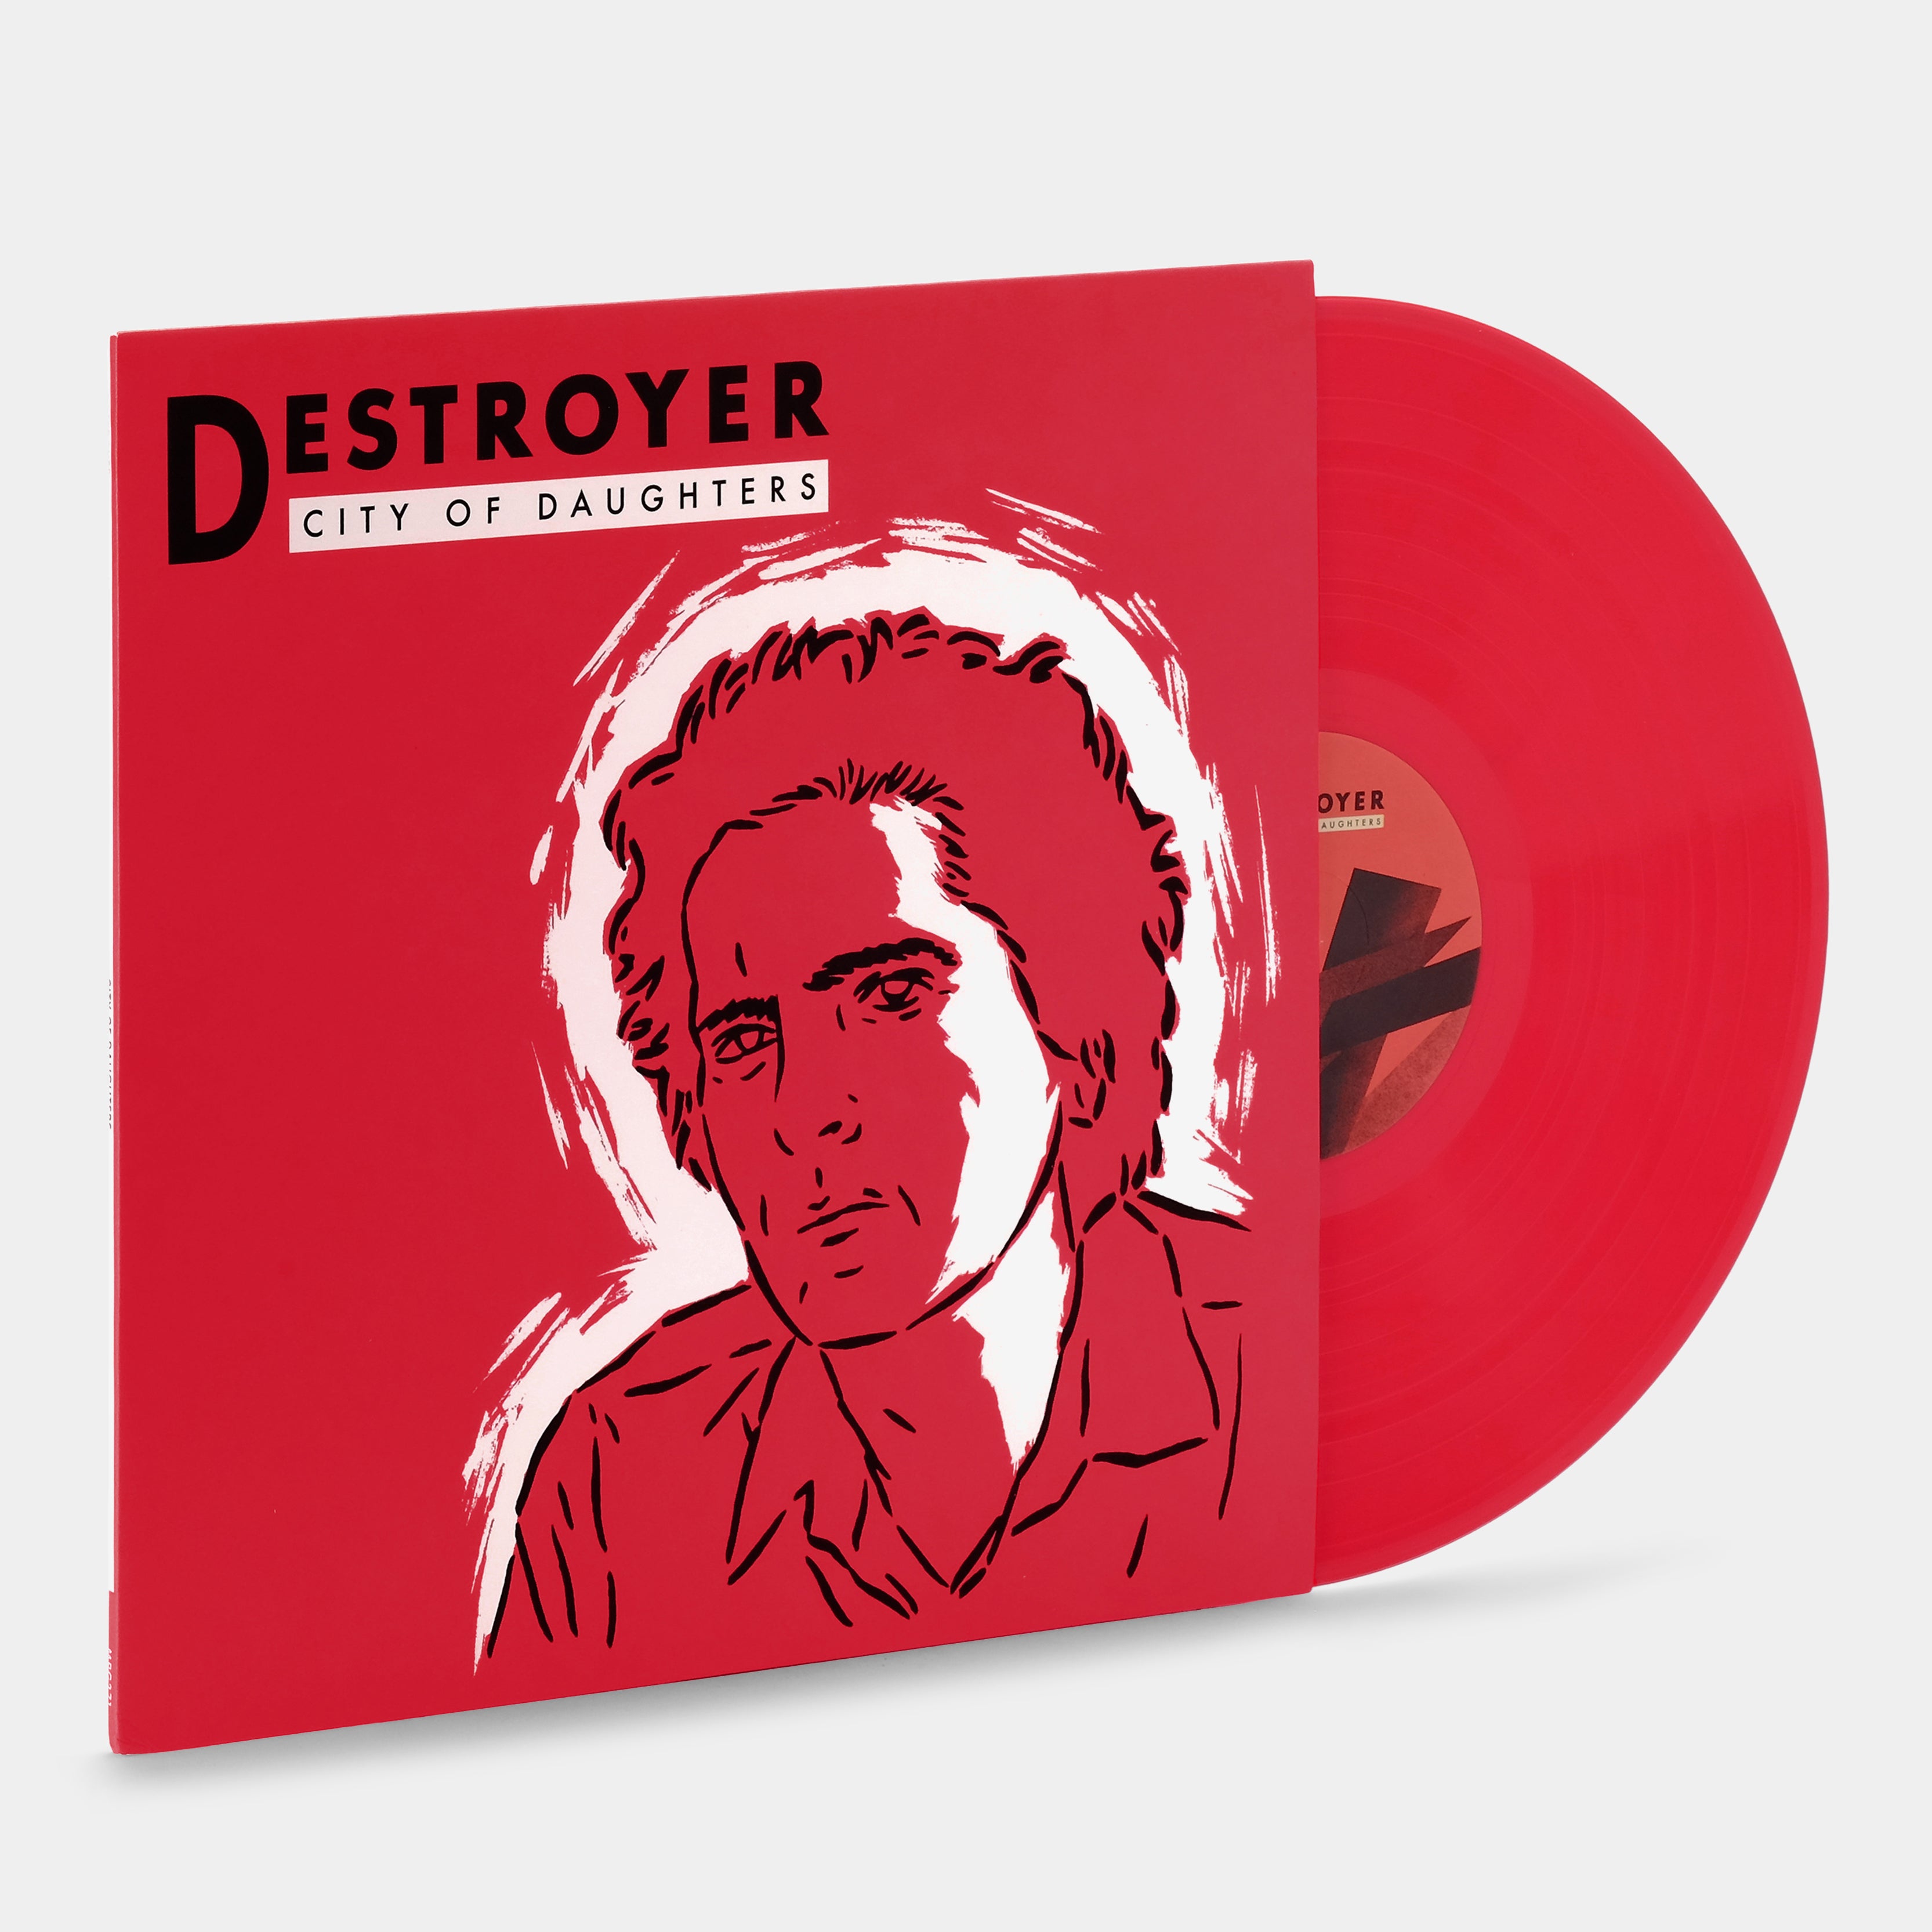 Destroyer - City Of Daughters LP Red Vinyl Record